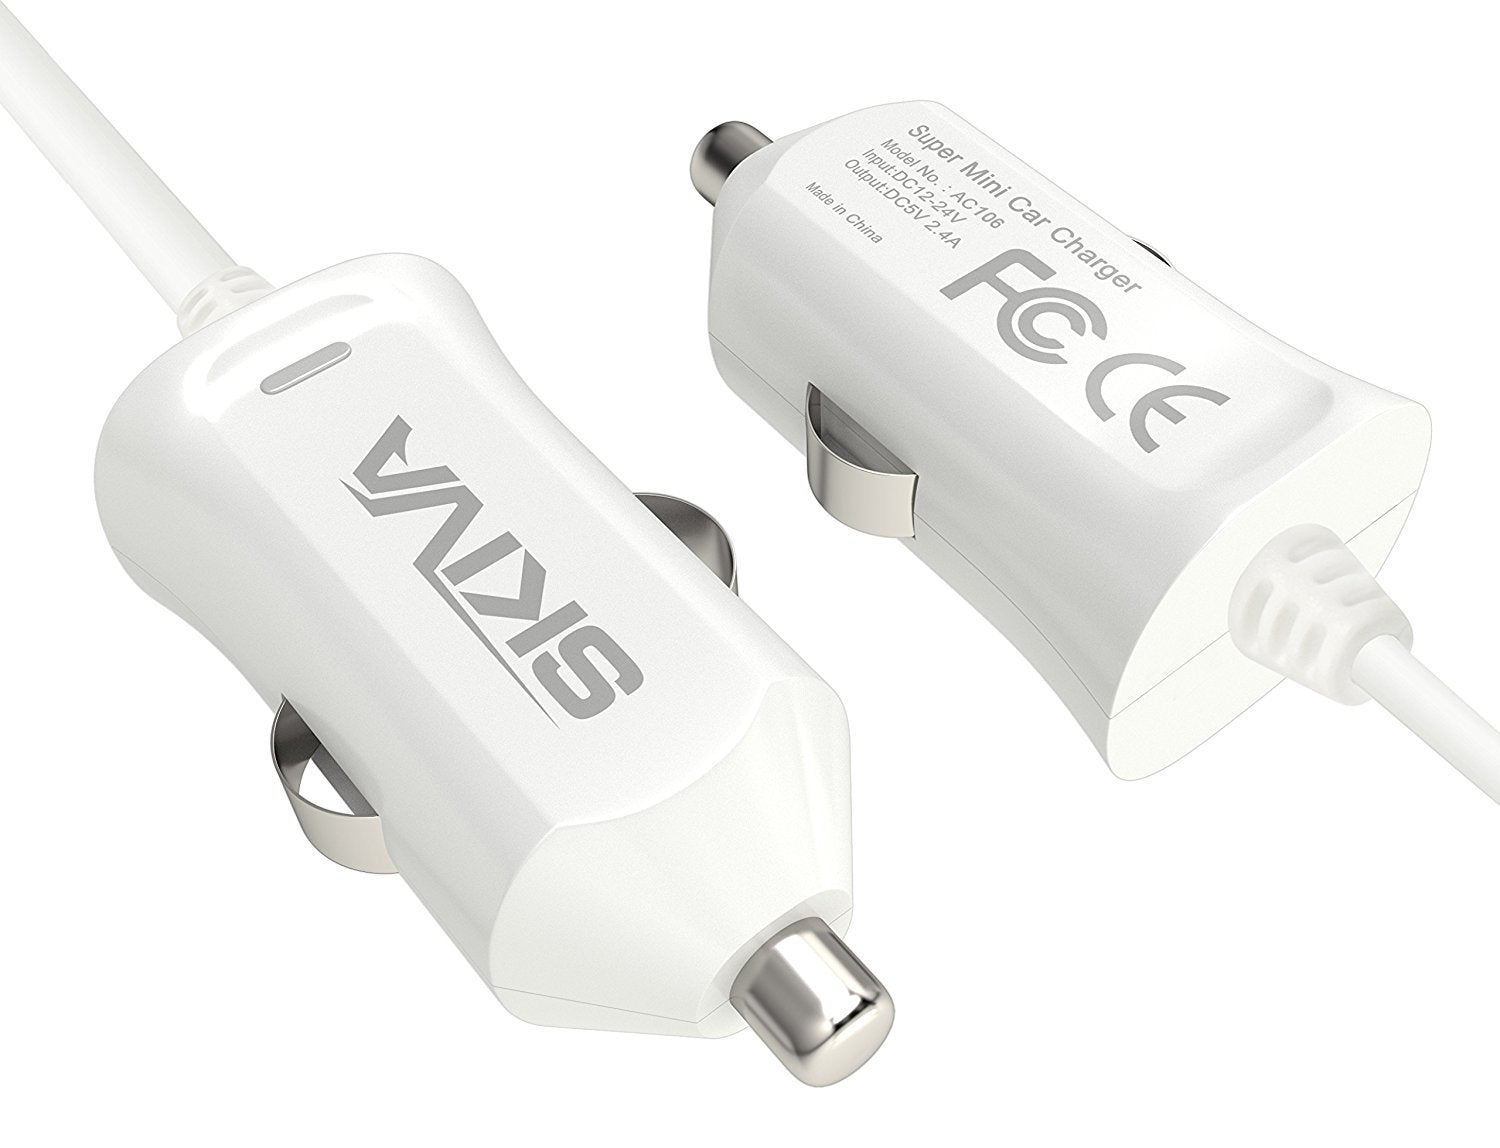 12W Car Charger with Lightning Connector - Budi M8J062L